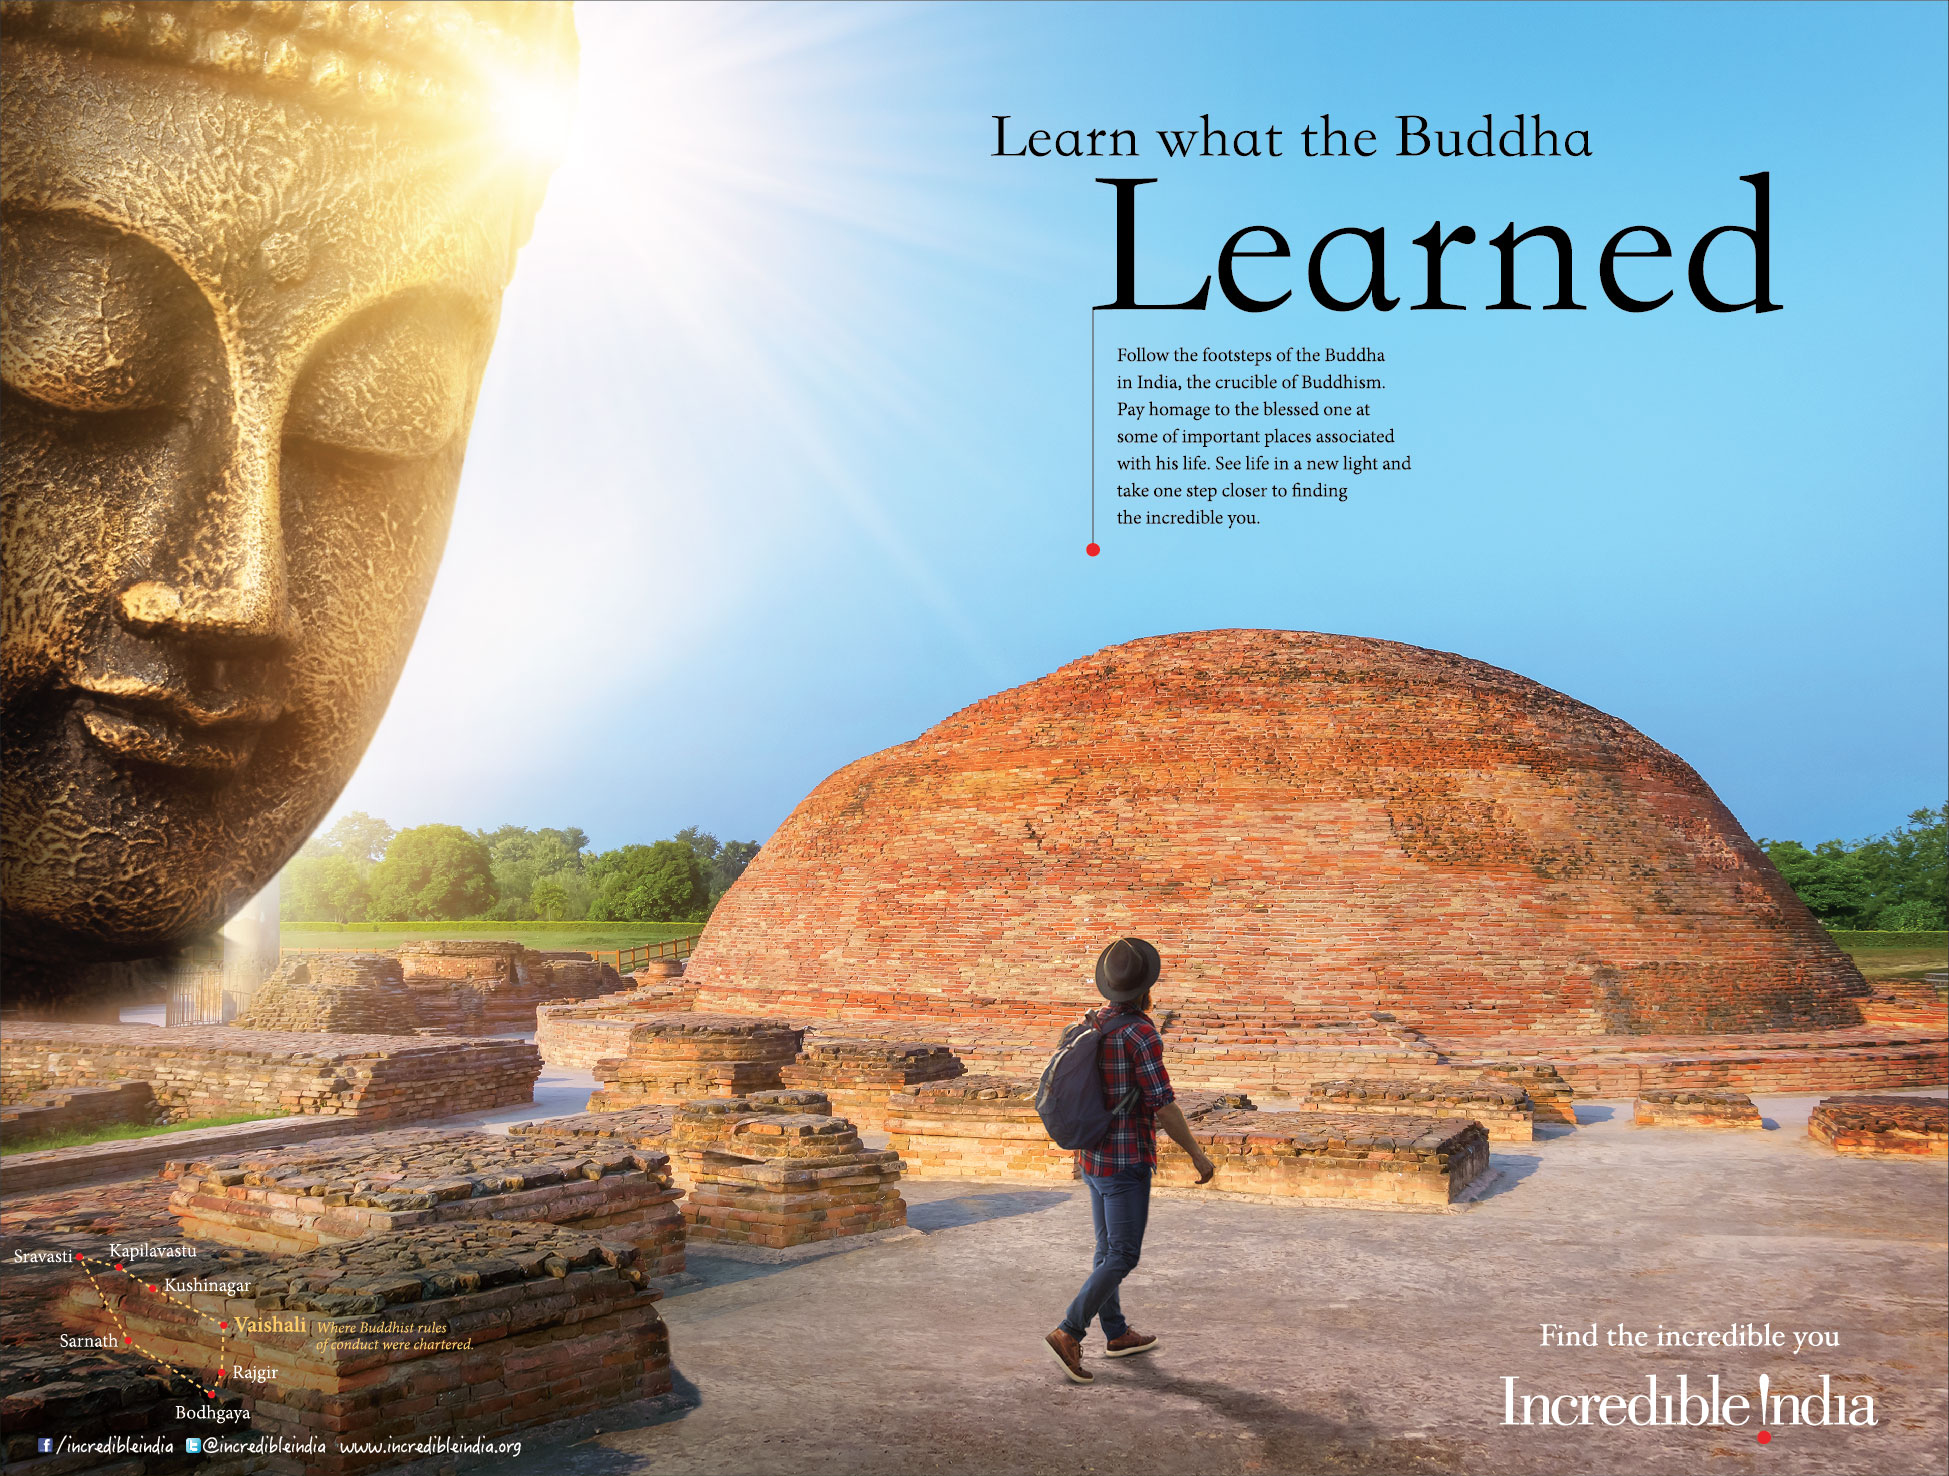 Follow the Steps of Buddha - Incredible India | Print mock-up 4 by Stark Communications Pvt Ltd